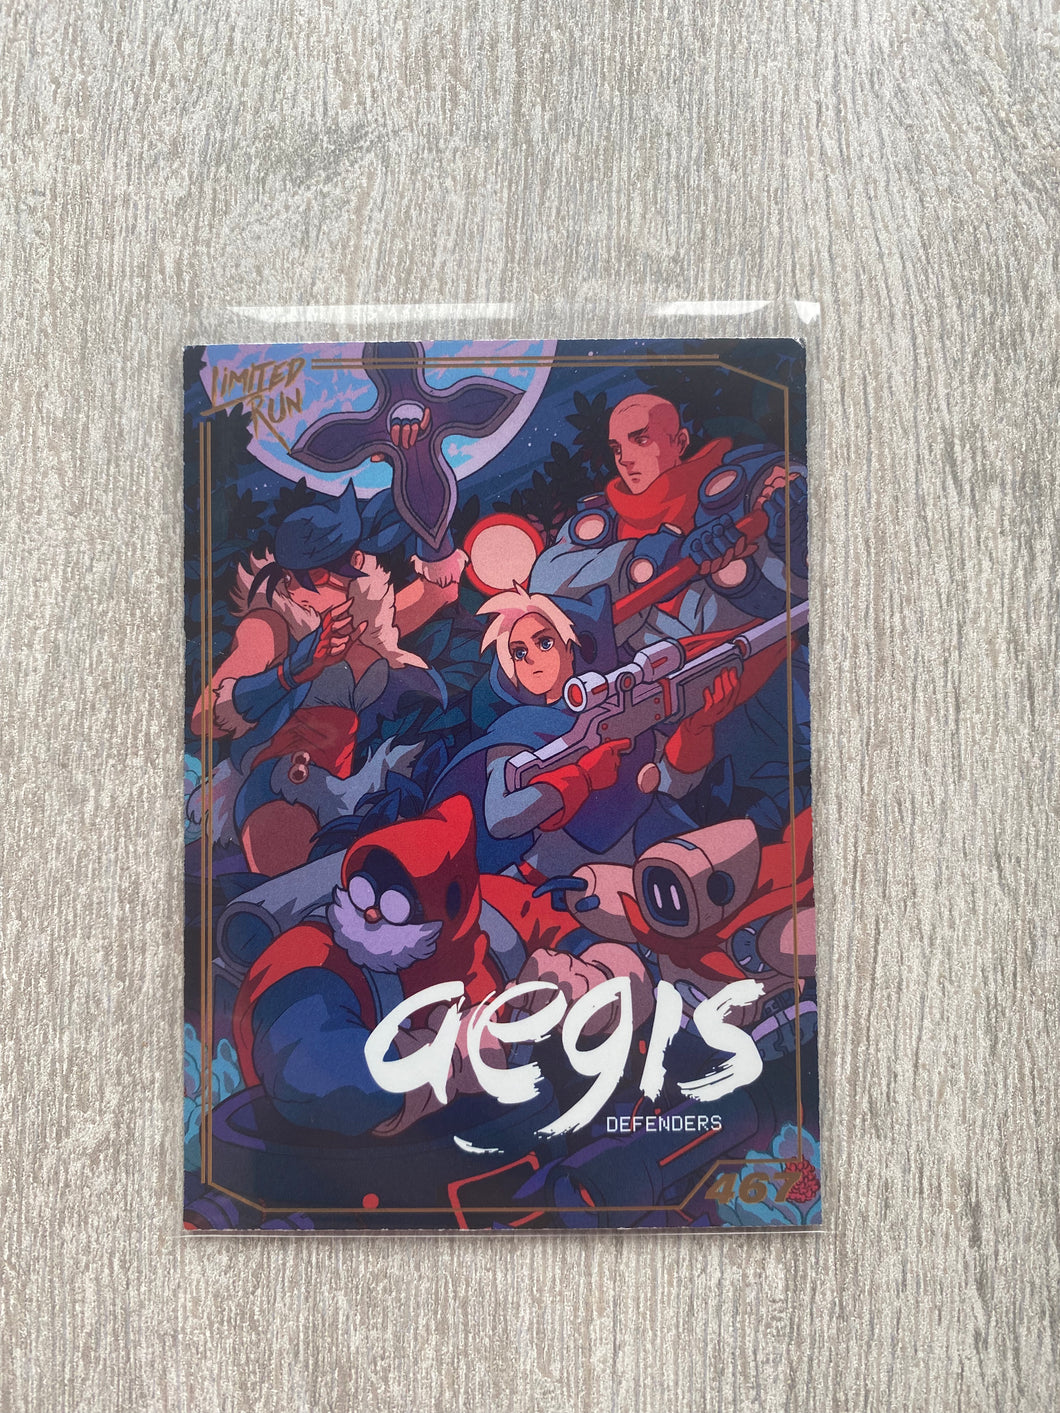 Gen1 #467 Gold Aegis defenders Limited run games Trading card